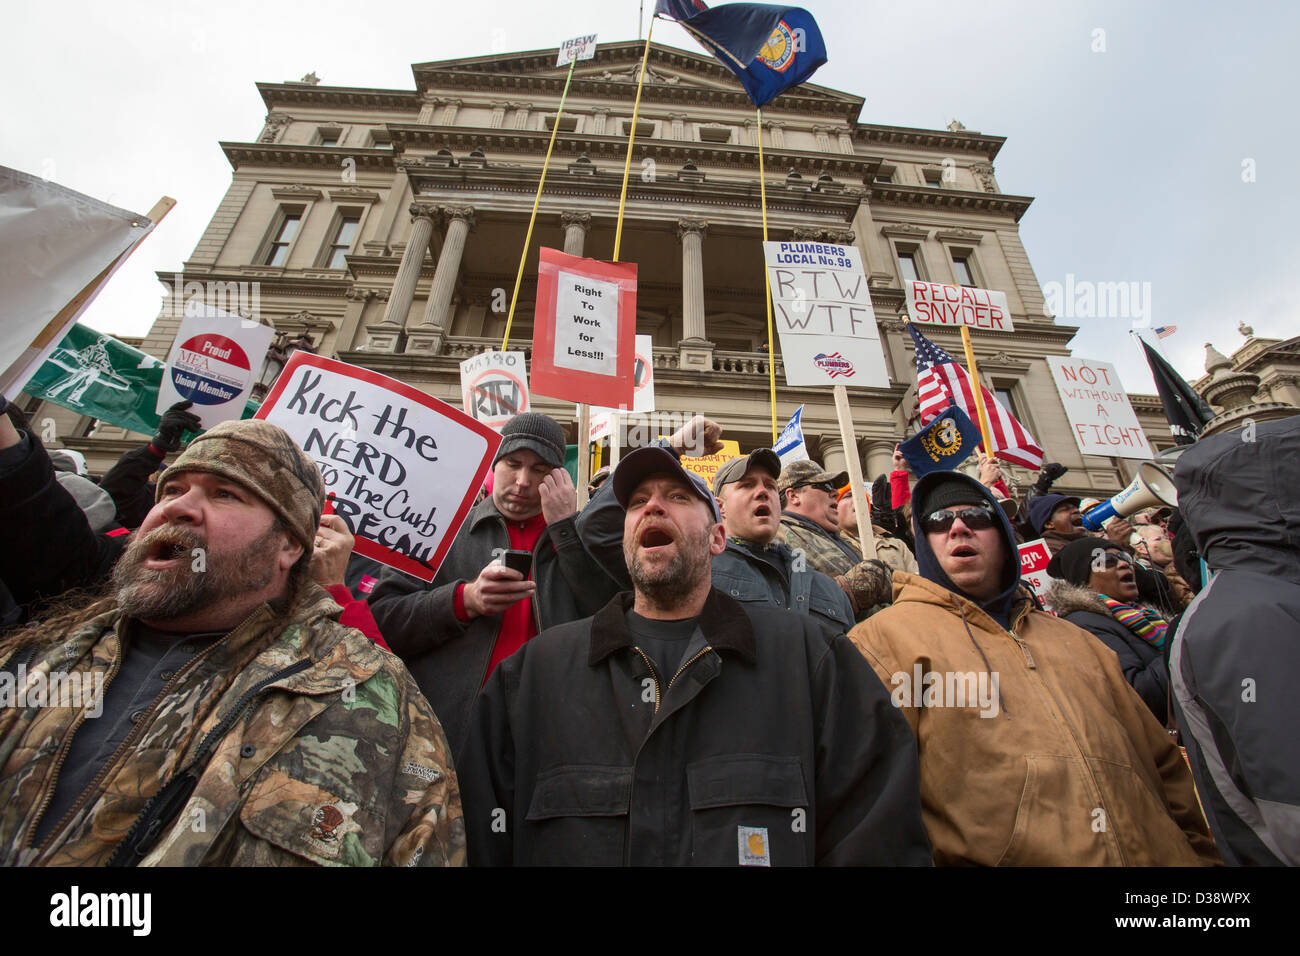 Union members protest 'right to work' legislation at Michigan state capitol Stock Photo